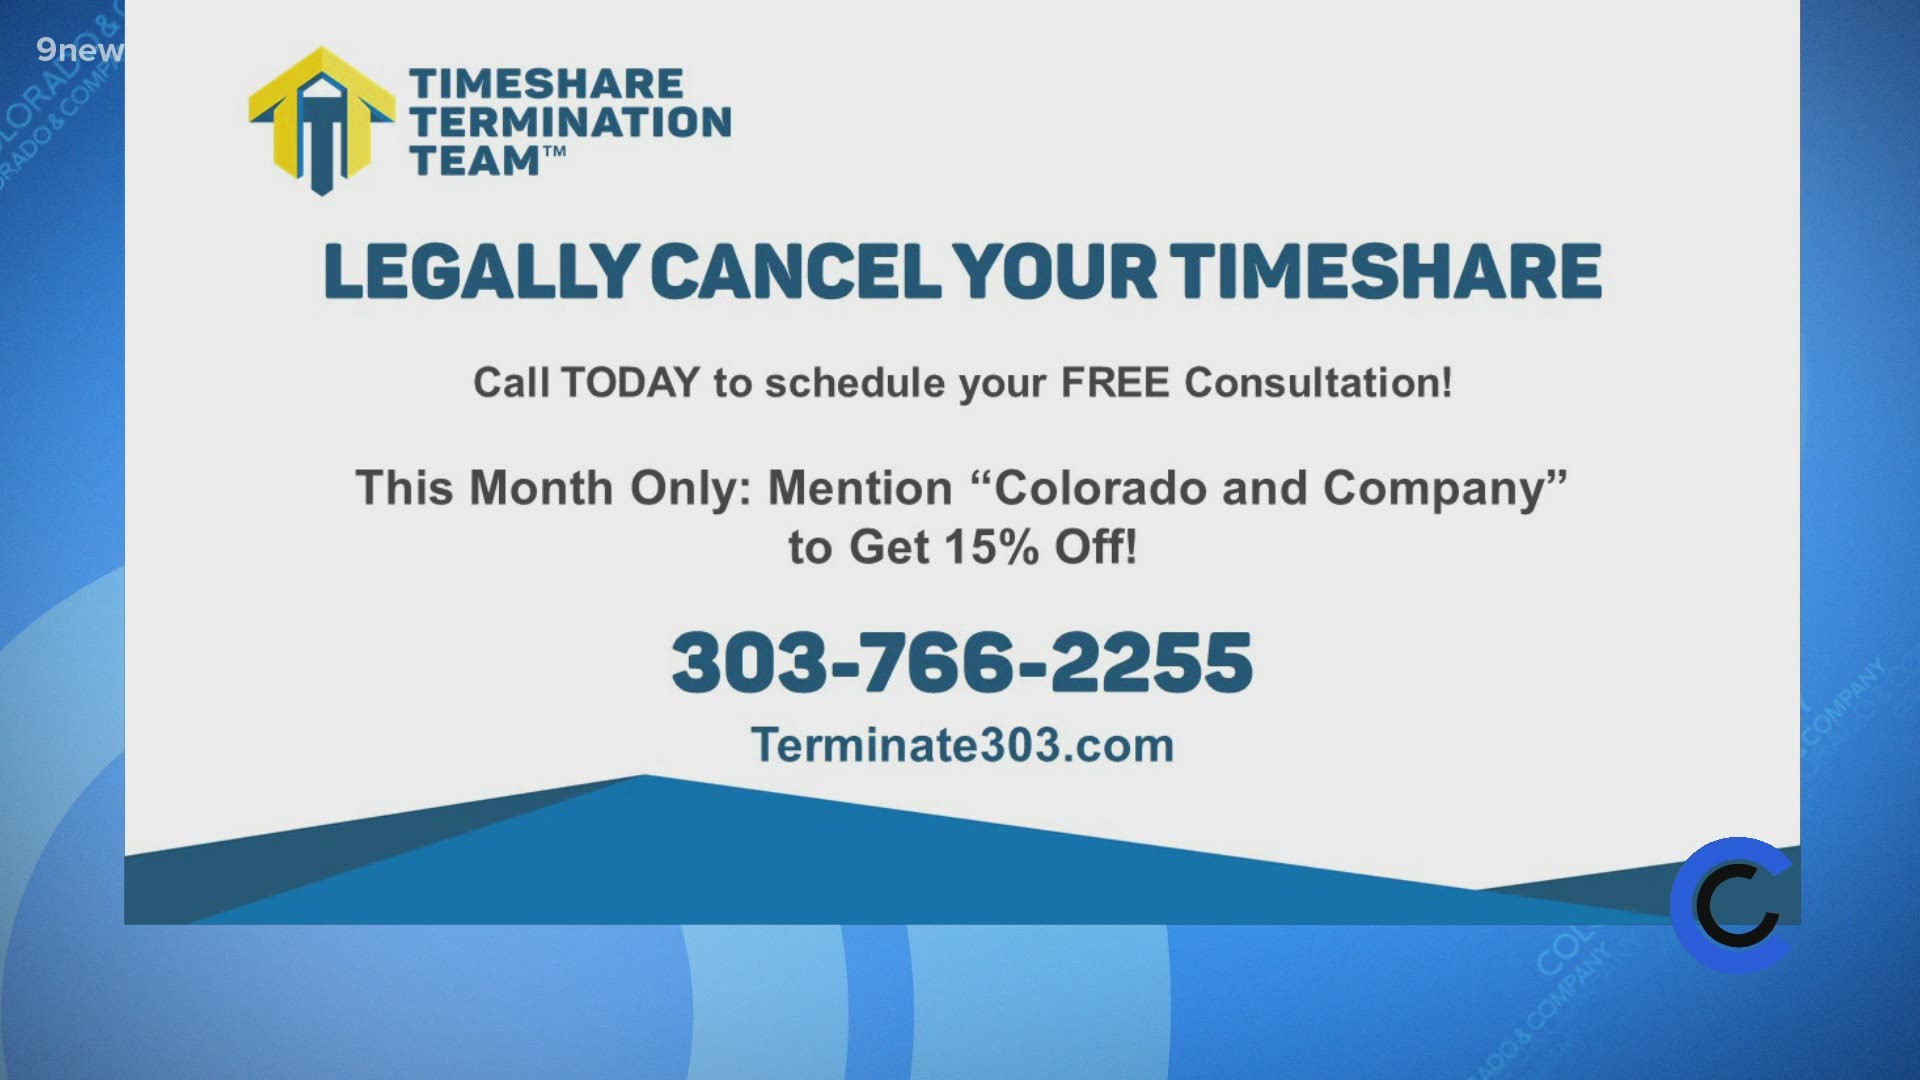 Ditch your timeshare for good. Call the Timeshare Termination Team at 303.766.2255 and mention COCO for a 15% mortgage credit! Learn more at Terminate303.com.